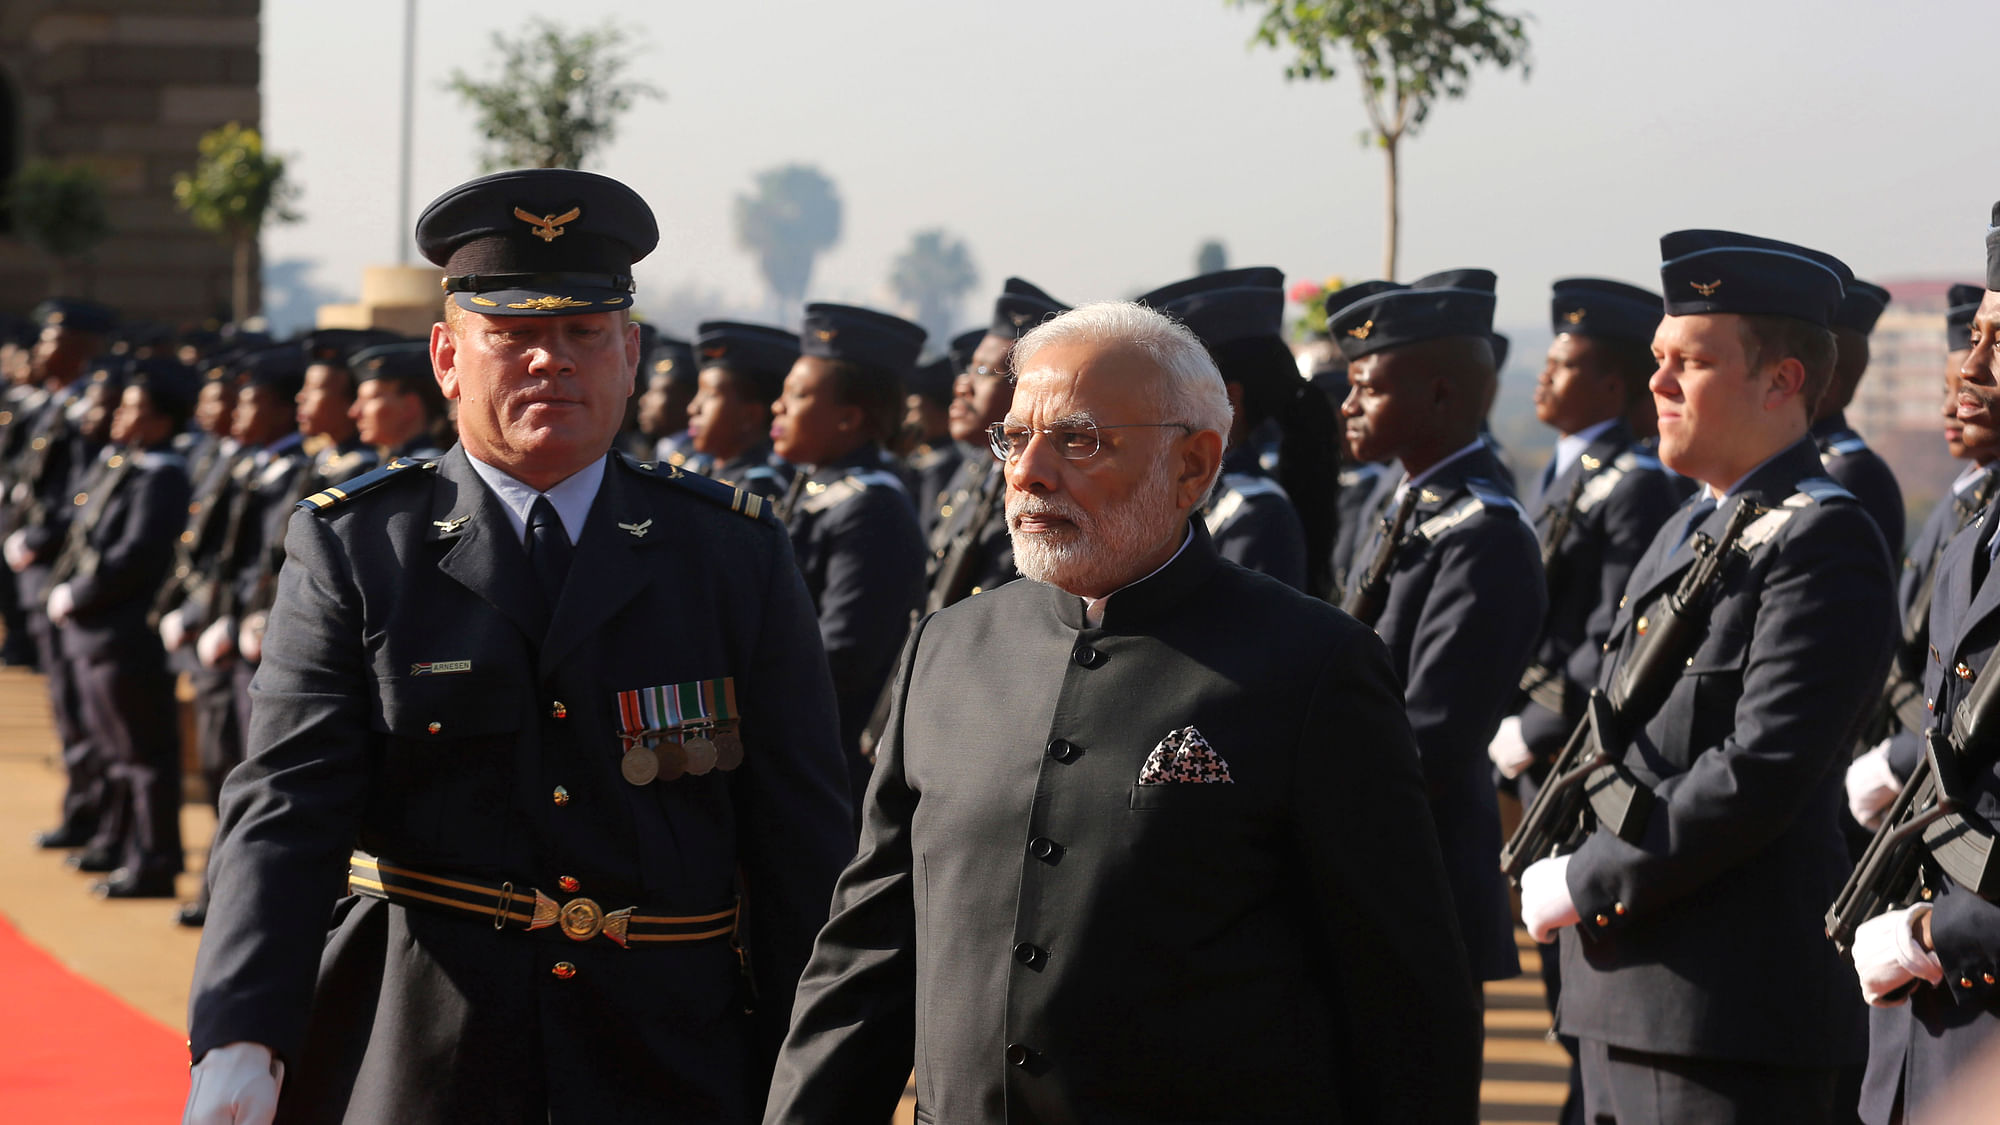 Prime Minister Narendra Modi inspects a guard of honour at an arrival ceremony at the Union Building in Pretoria South Africa. (Photo: AP)